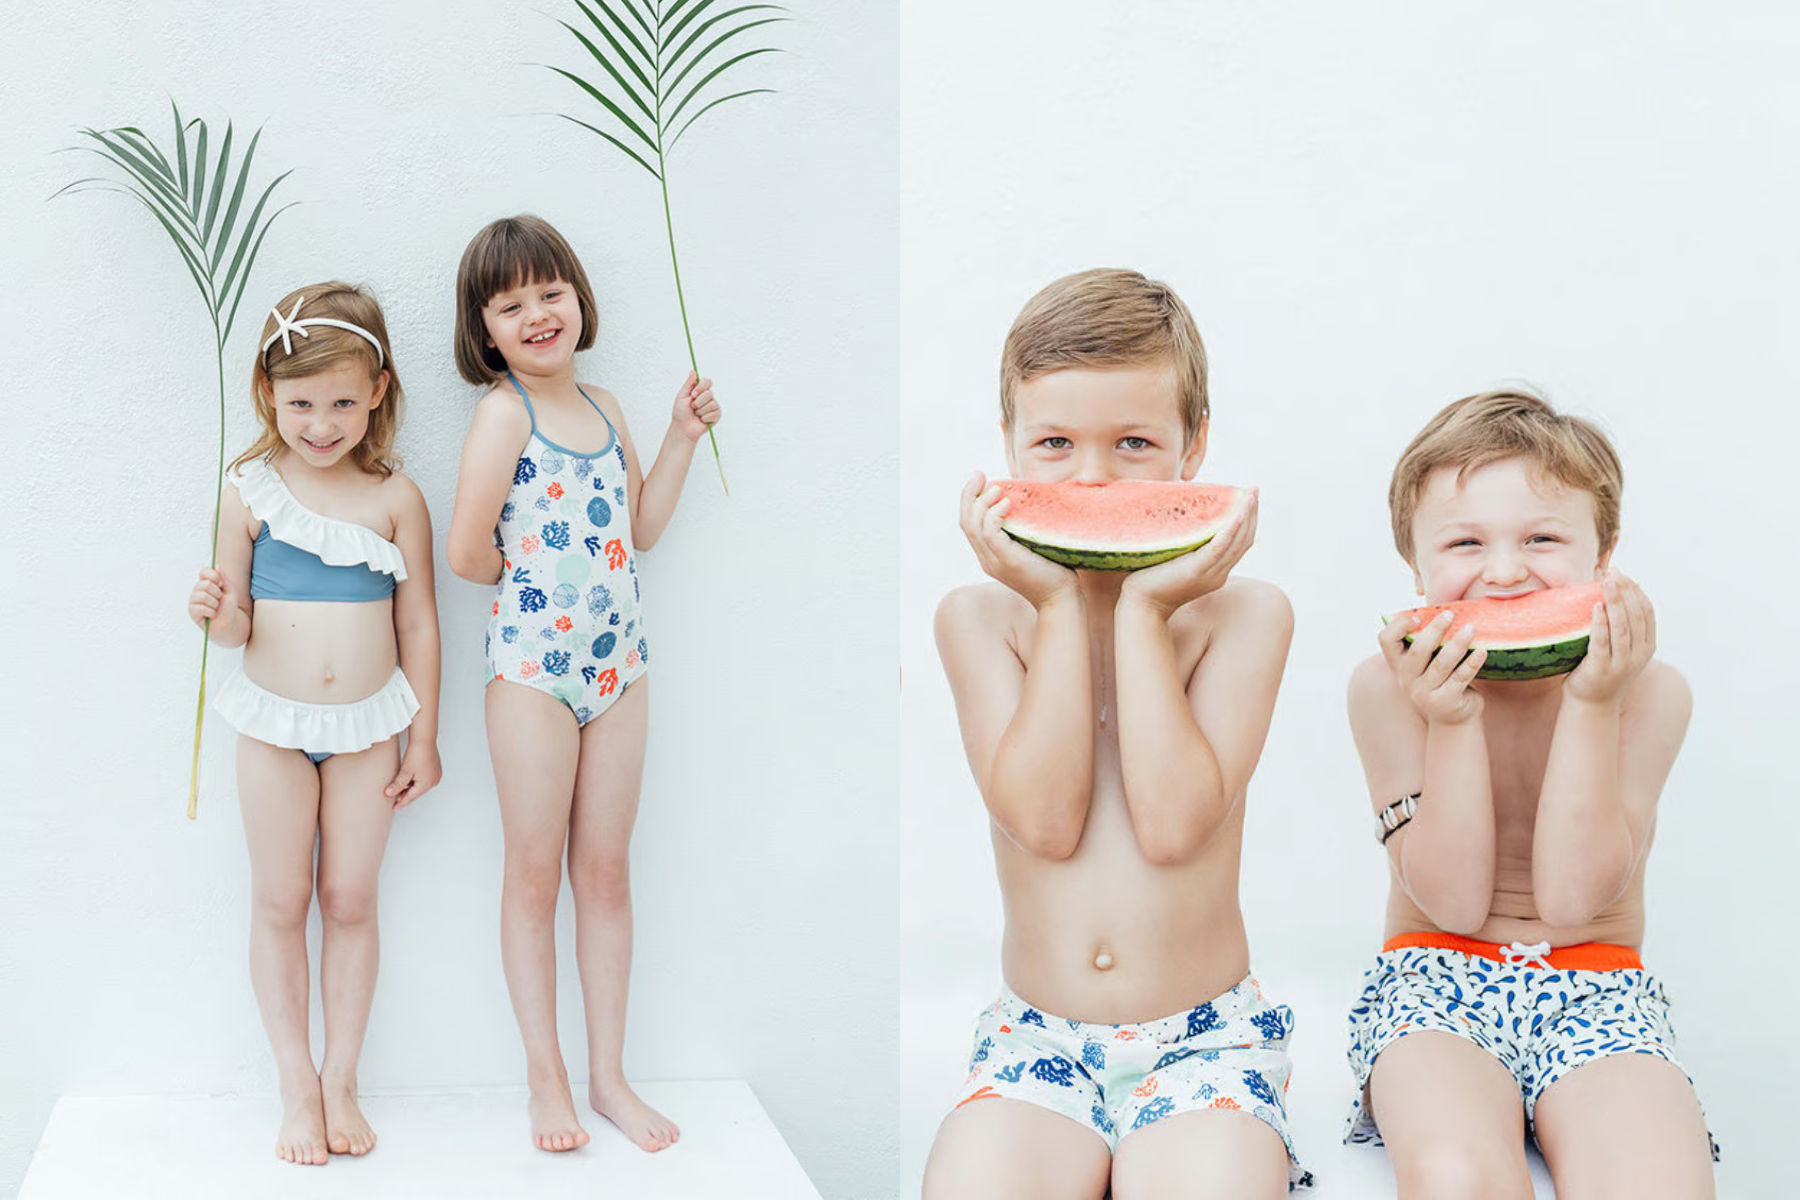 Created by Federica Folco, Folpetto offers elegant, sustainable swimwear for children, inspired by the Mediterranean. Beautiful, sustainable swimwear for children combines classic Italian design with eco-friendly fabrics. The image shows kids wearing Folpetto Swimwear.